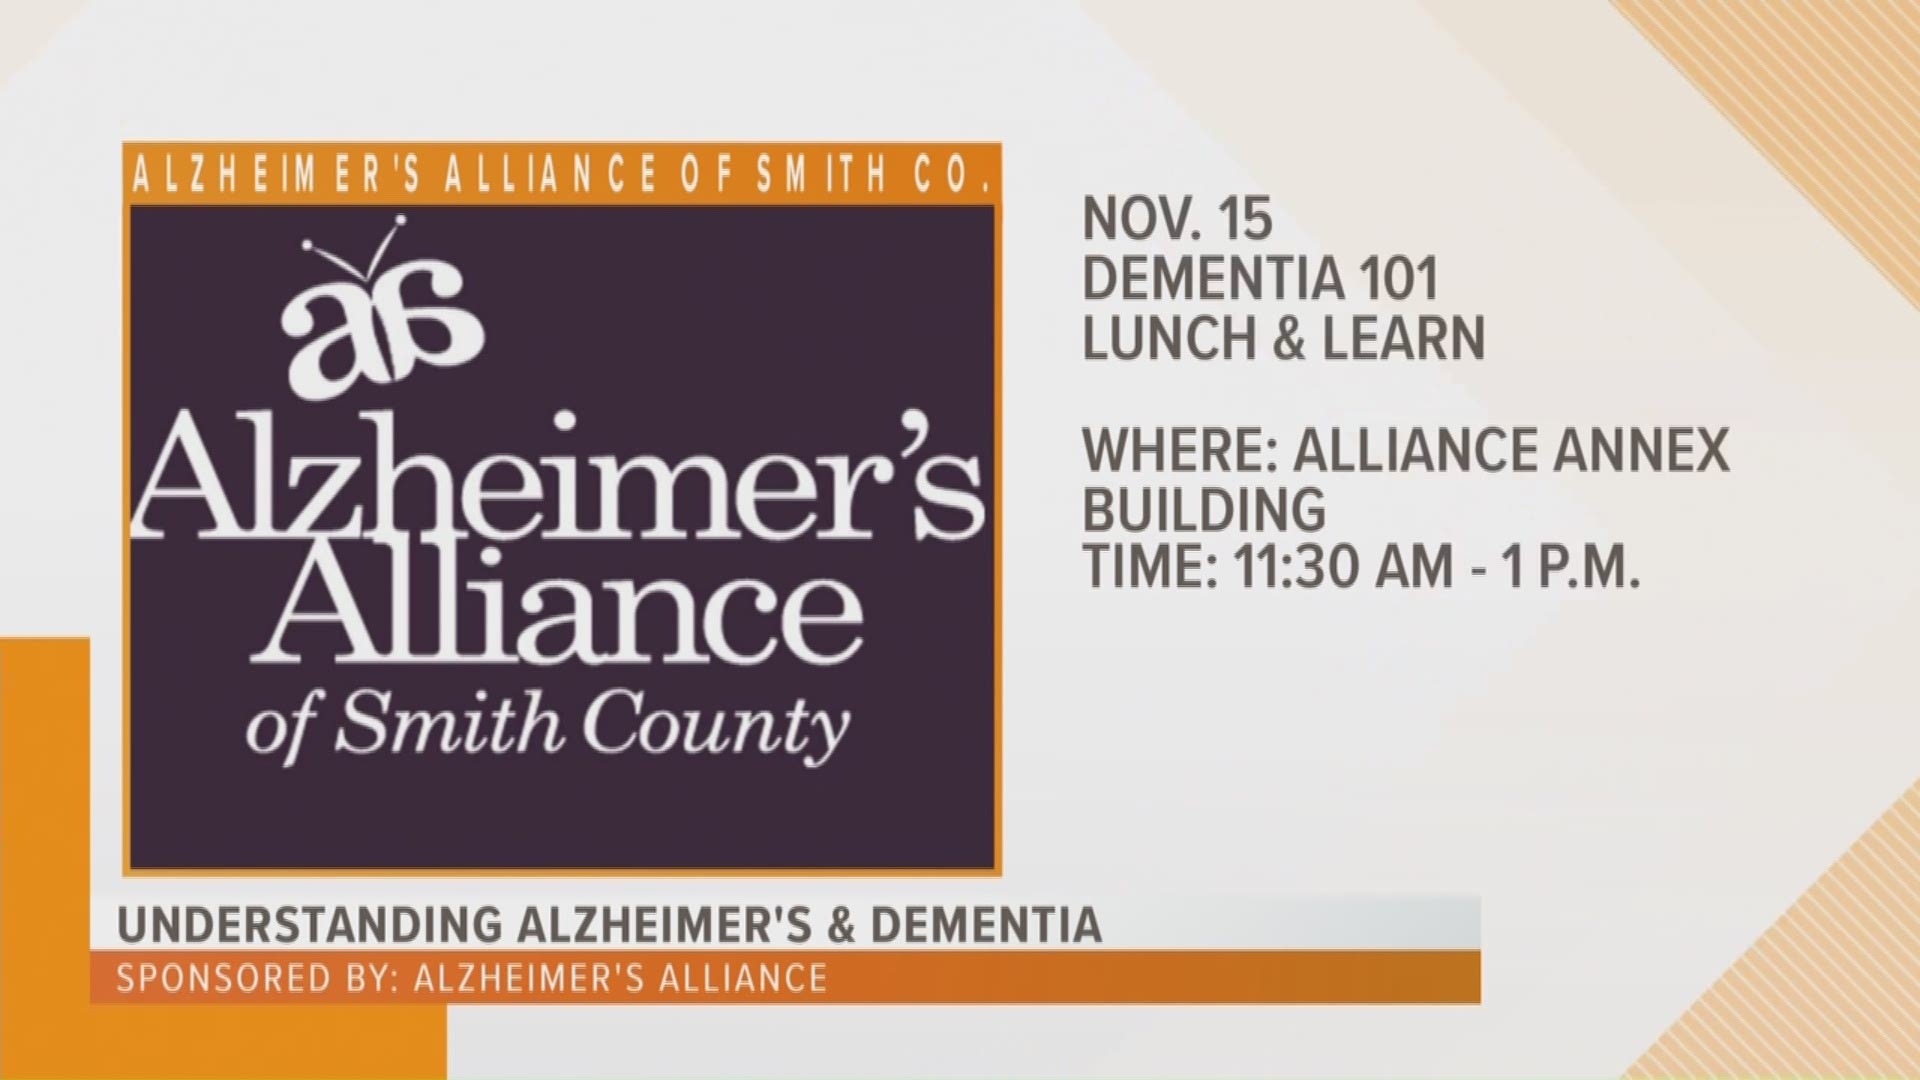 November is National Alzheimer's Awareness Month. The Alzheimer's Alliance of Smith County is hosting workshops throughout the month on understanding Alzheimer's.